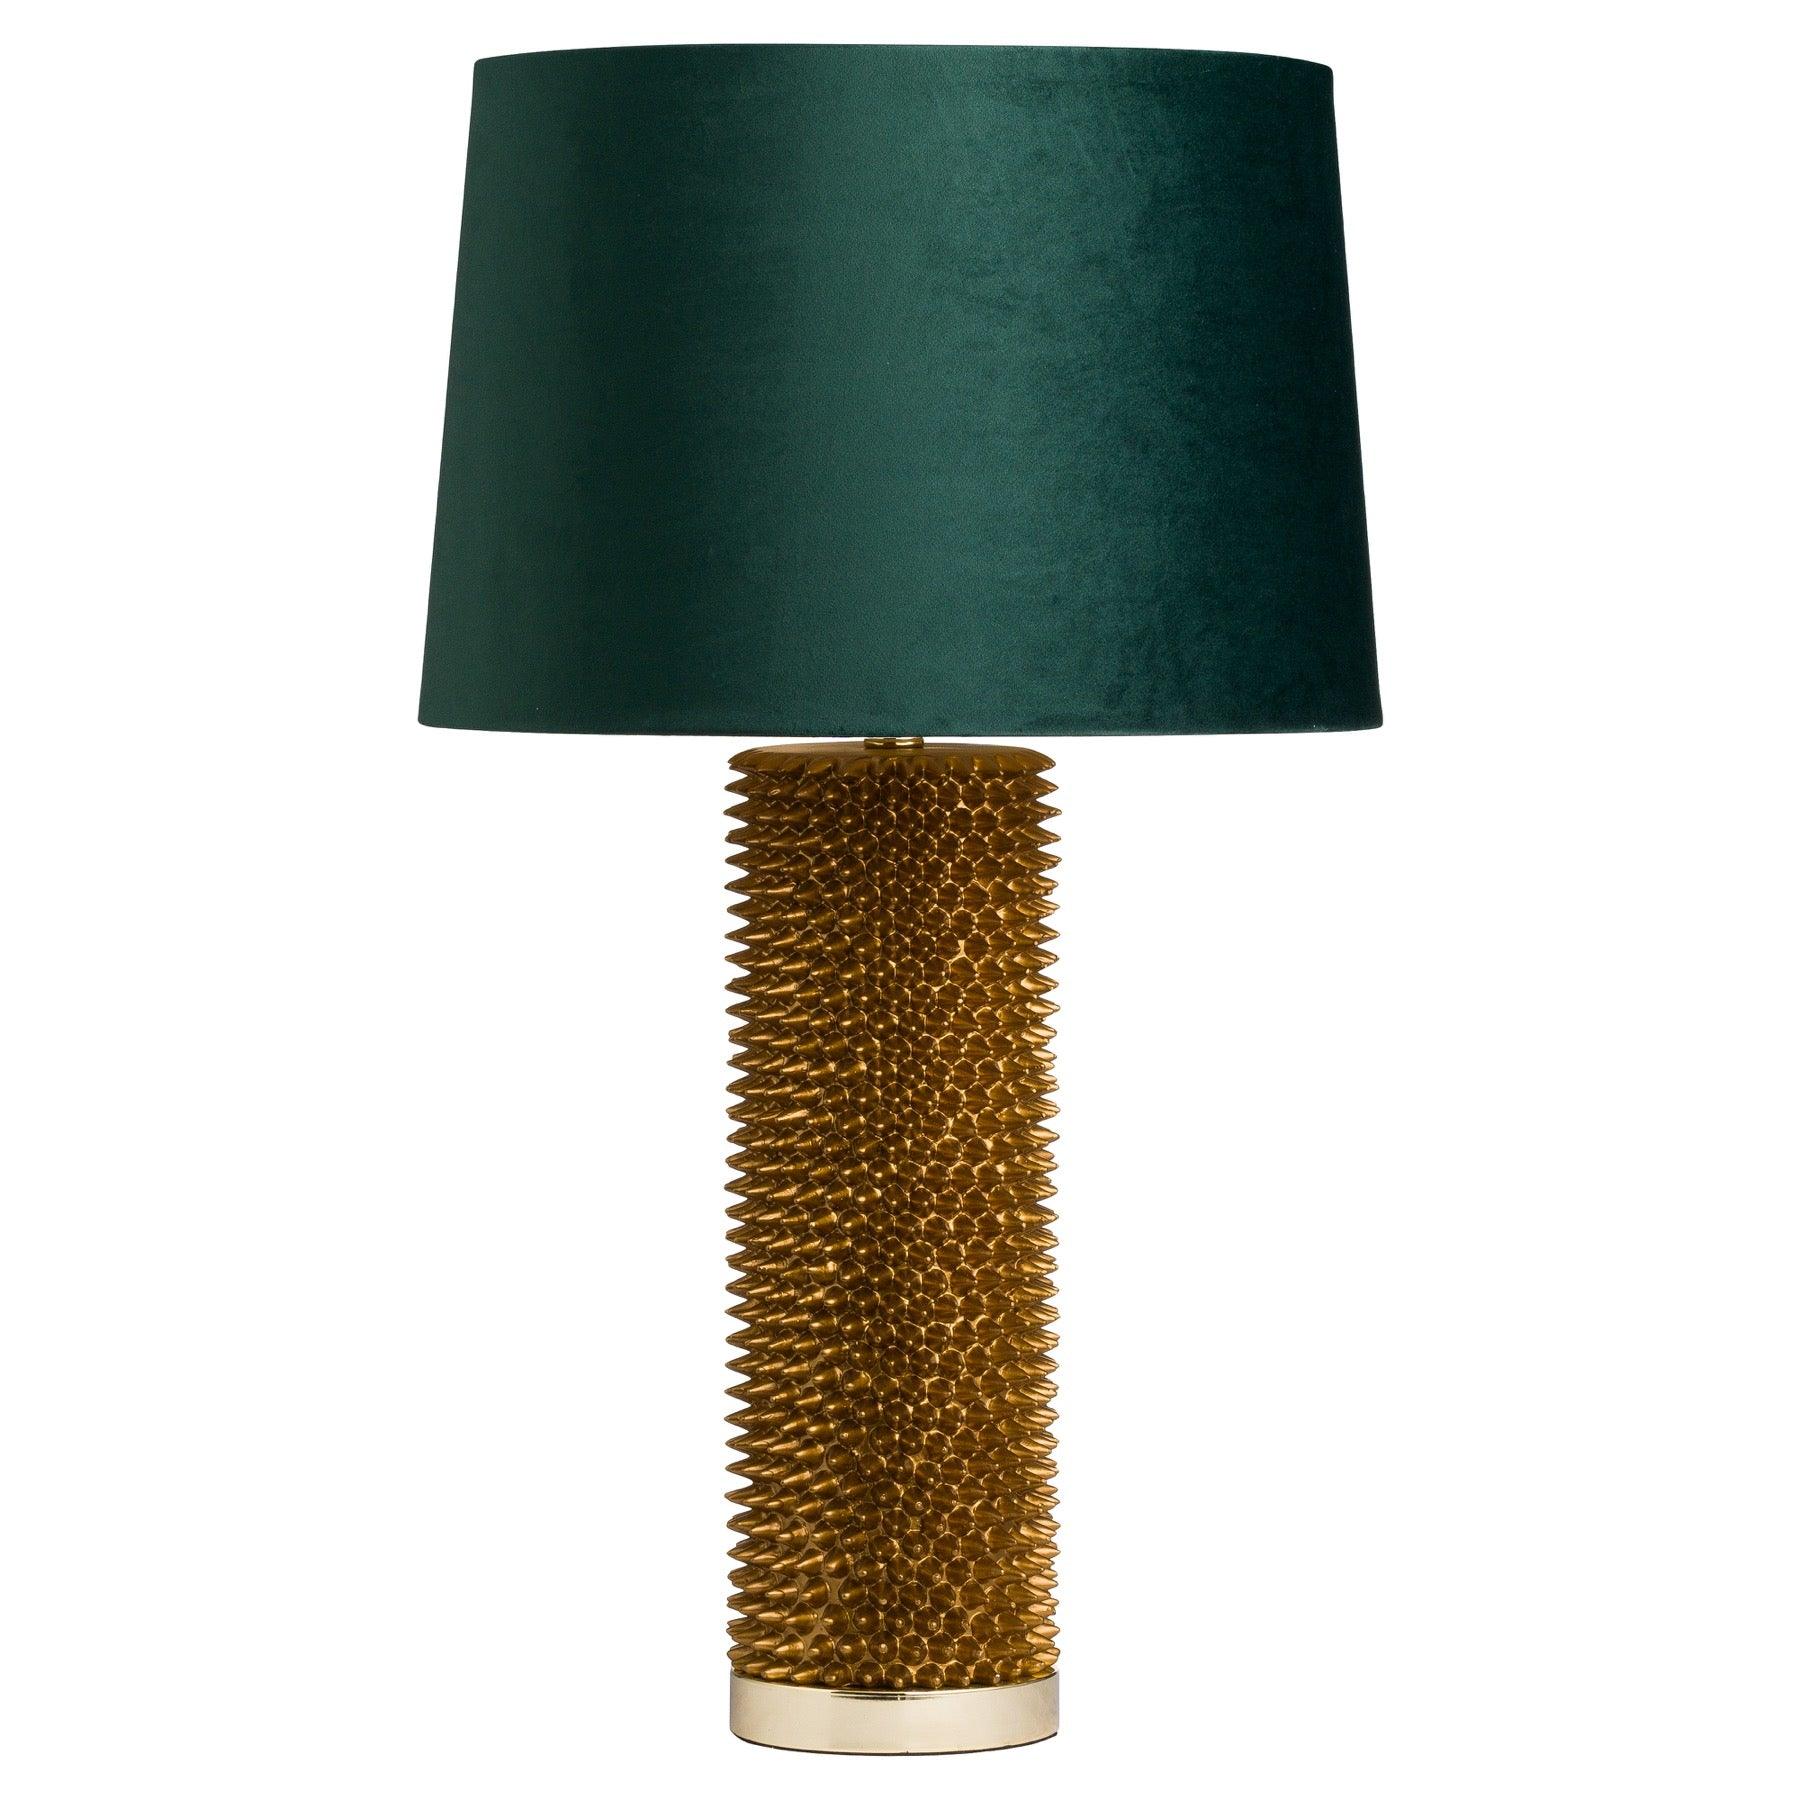 Antique Gold Acantho Table Lamp With Emerald Velvet Shade - Vookoo Lifestyle